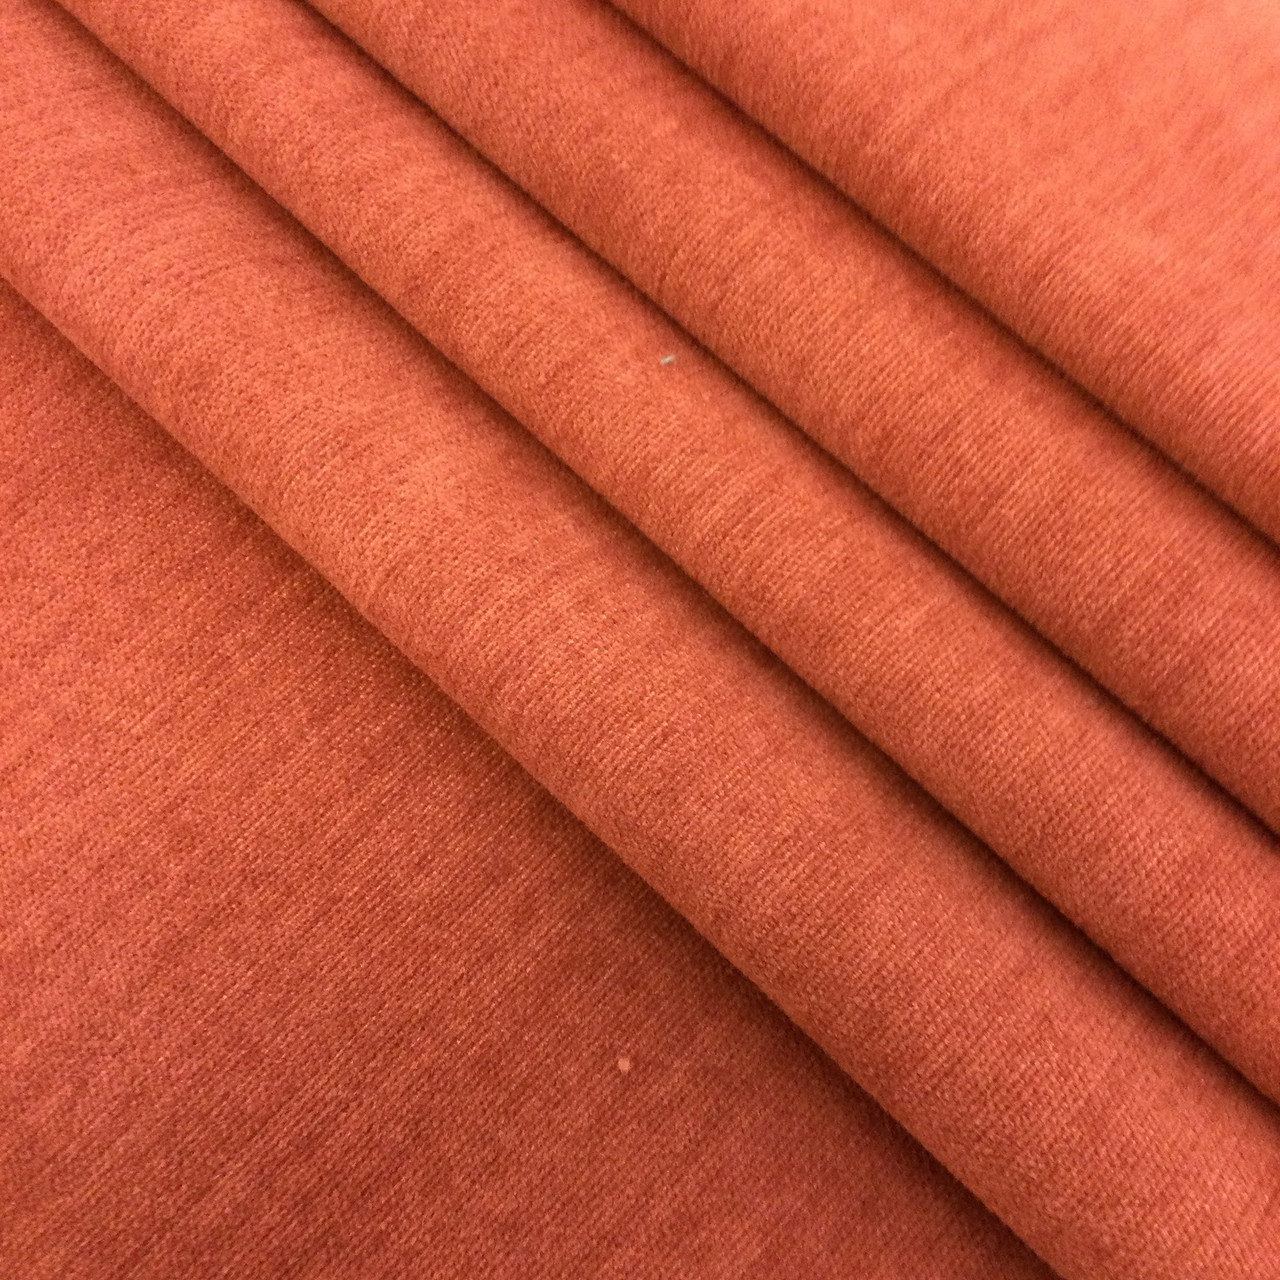 Jukebox in Tangerine Heavyweight Microfiber Upholstery Fabric Solid  Spice Reddish Orange 54" Wide By the Yard Fabric Warehouse